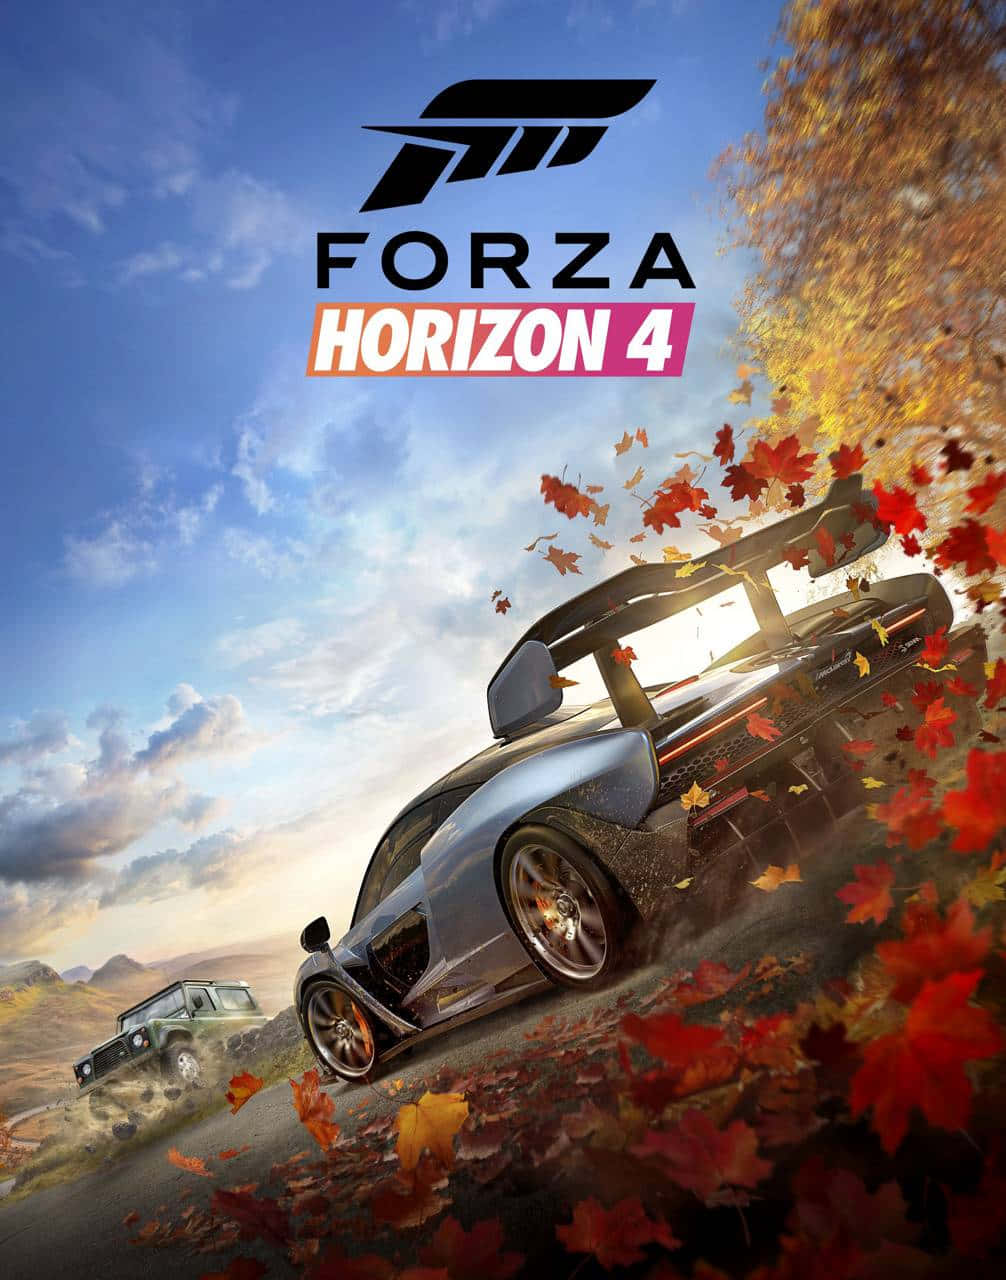 Nyd Android Forza Horizon 4 i høj opløsning.